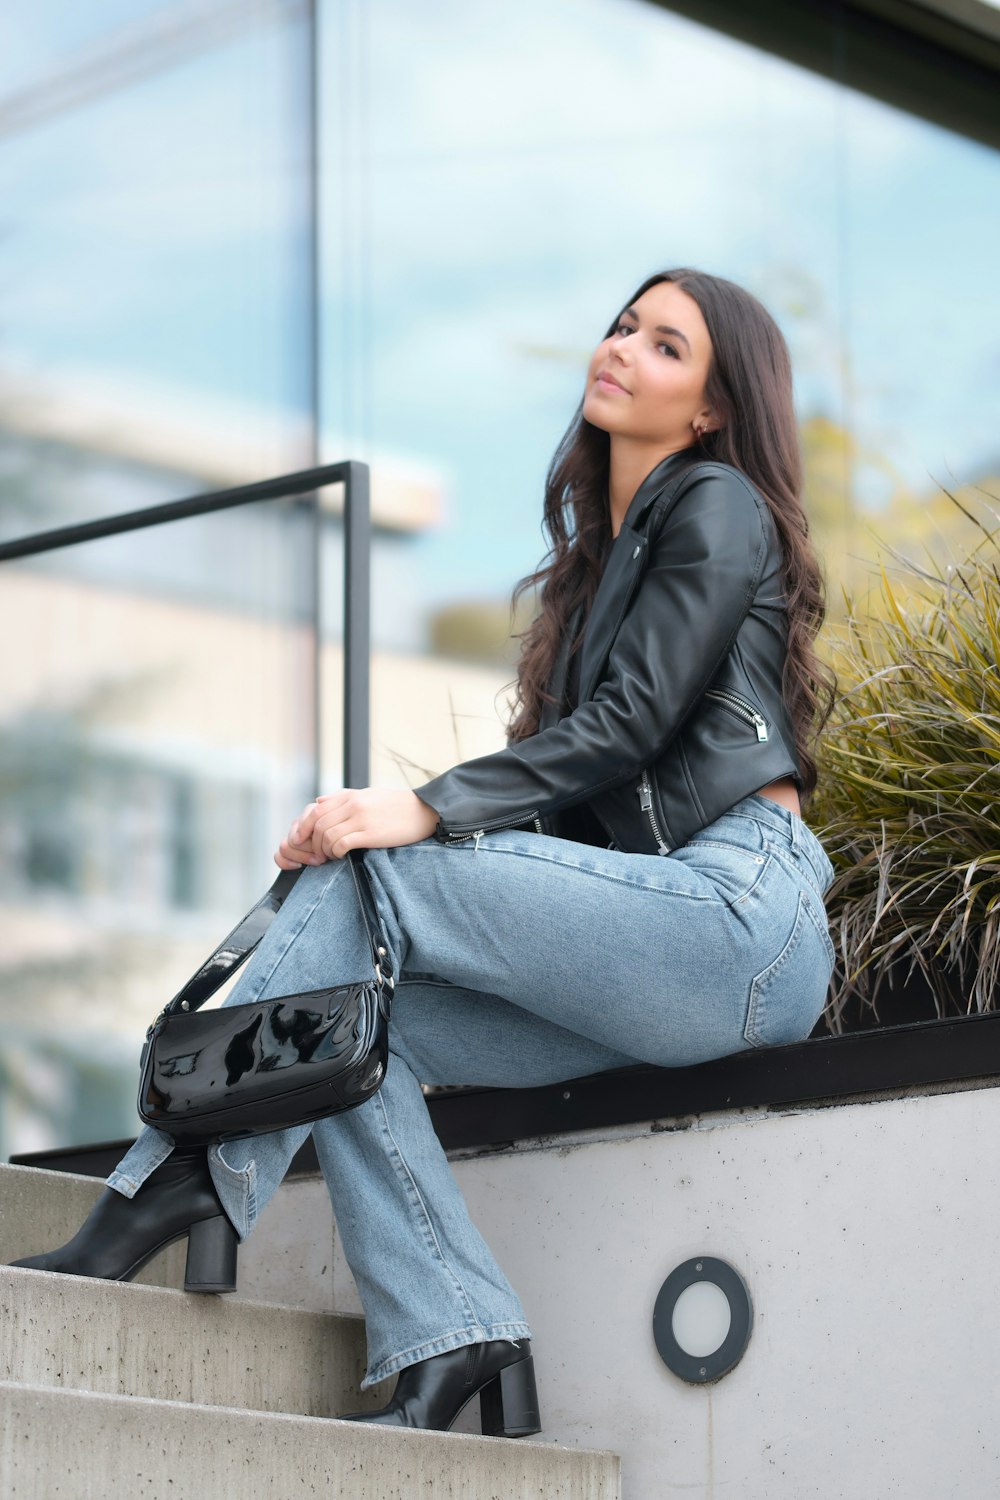 woman in black leather jacket and blue denim jeans sitting on white concrete bench during daytime